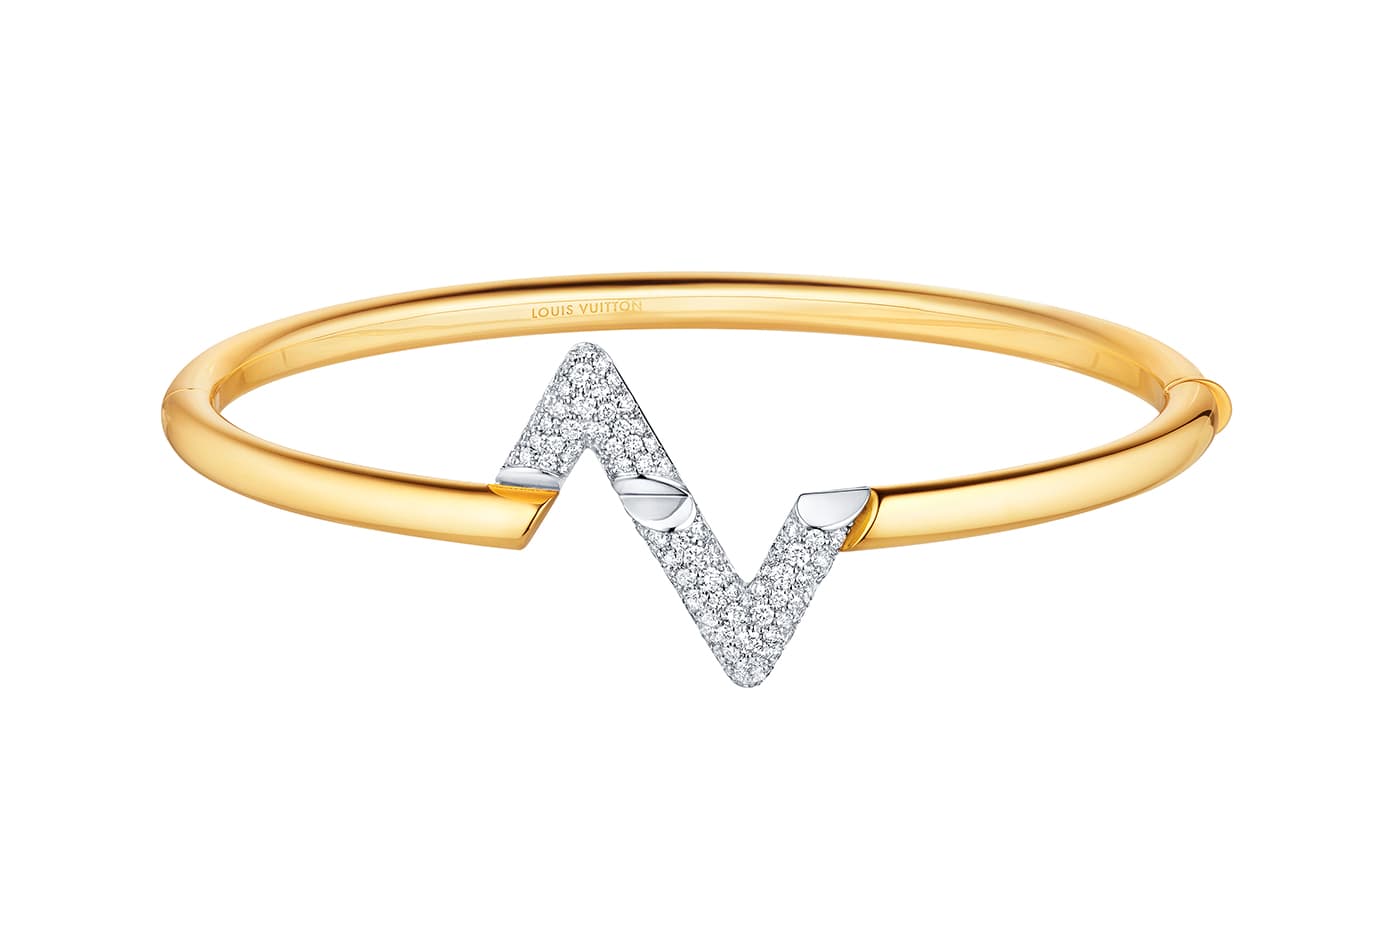 LV Volt Upside Down Ring, Yellow Gold, White Gold And Diamonds